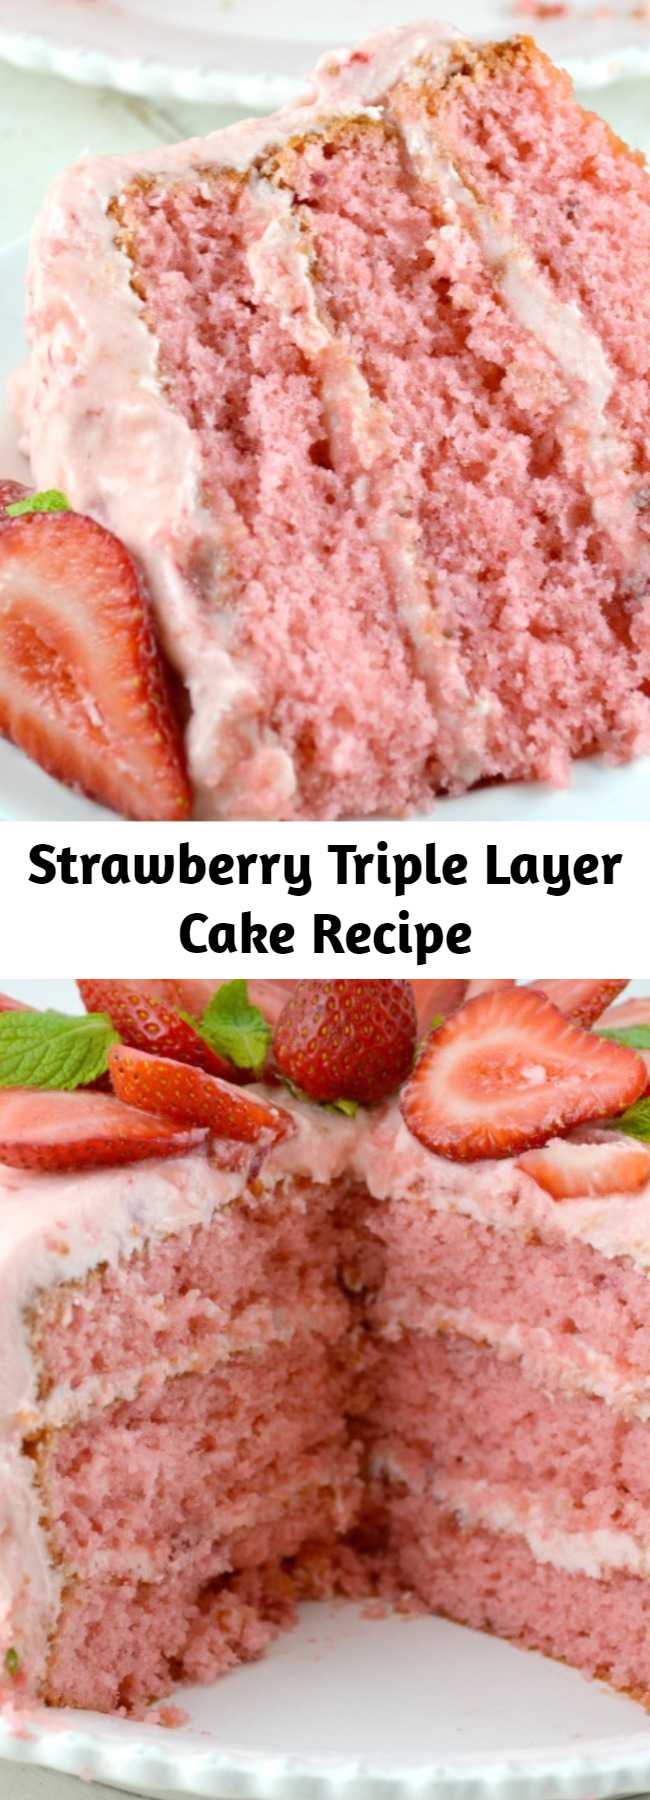 Our Easy Strawberry Triple Decker Cake Recipe is an absolute showstopper. Loaded with Fresh Strawberries, this Homemade Southern Delight is guaranteed to be a hit! Super Moist, Rich and Really Sweet, all topped with Strawberry Buttercream Frosting!!